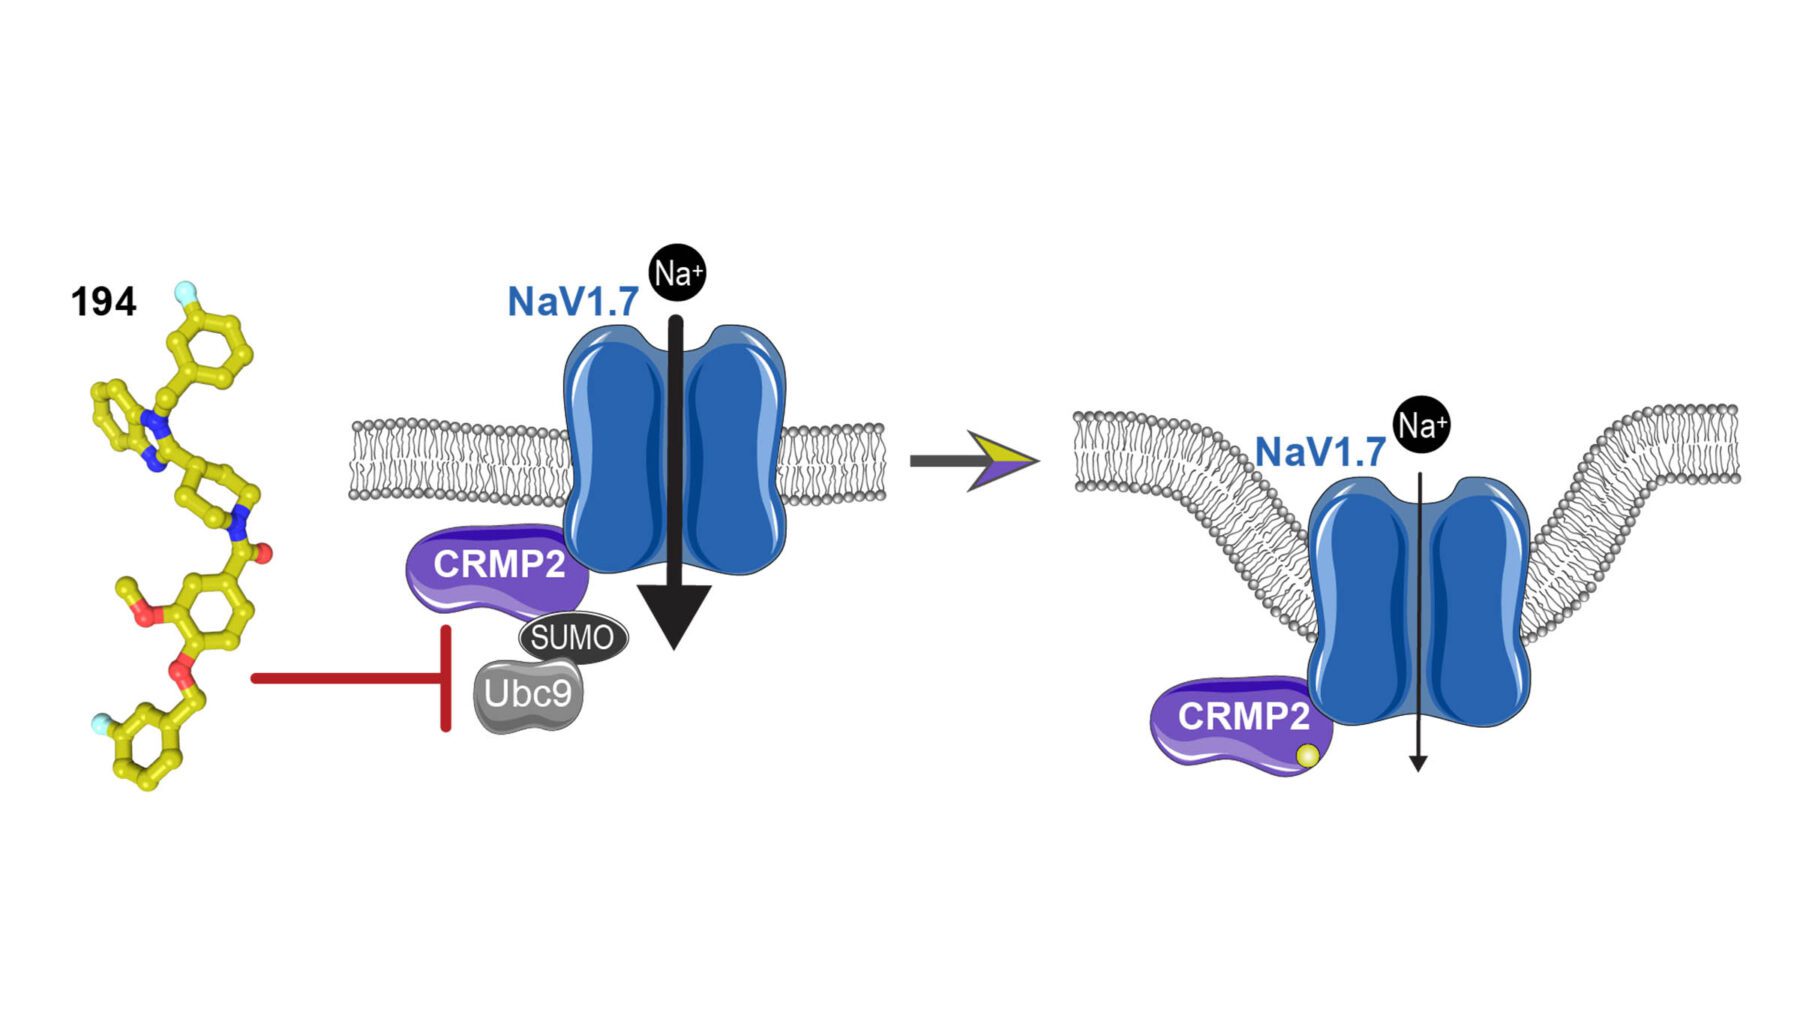 Compound 194 (left) was developed by researchers to uncouple the interaction between CRMP2 and the enzyme Ubc9, which indirectly regulates the sodium ion channel NaV1.7. A new study showed that the resulting reduction in sodium currents reduced pain. (Image: Samantha Perez-Miller, Aude Chefdeville and Rajesh Khanna)